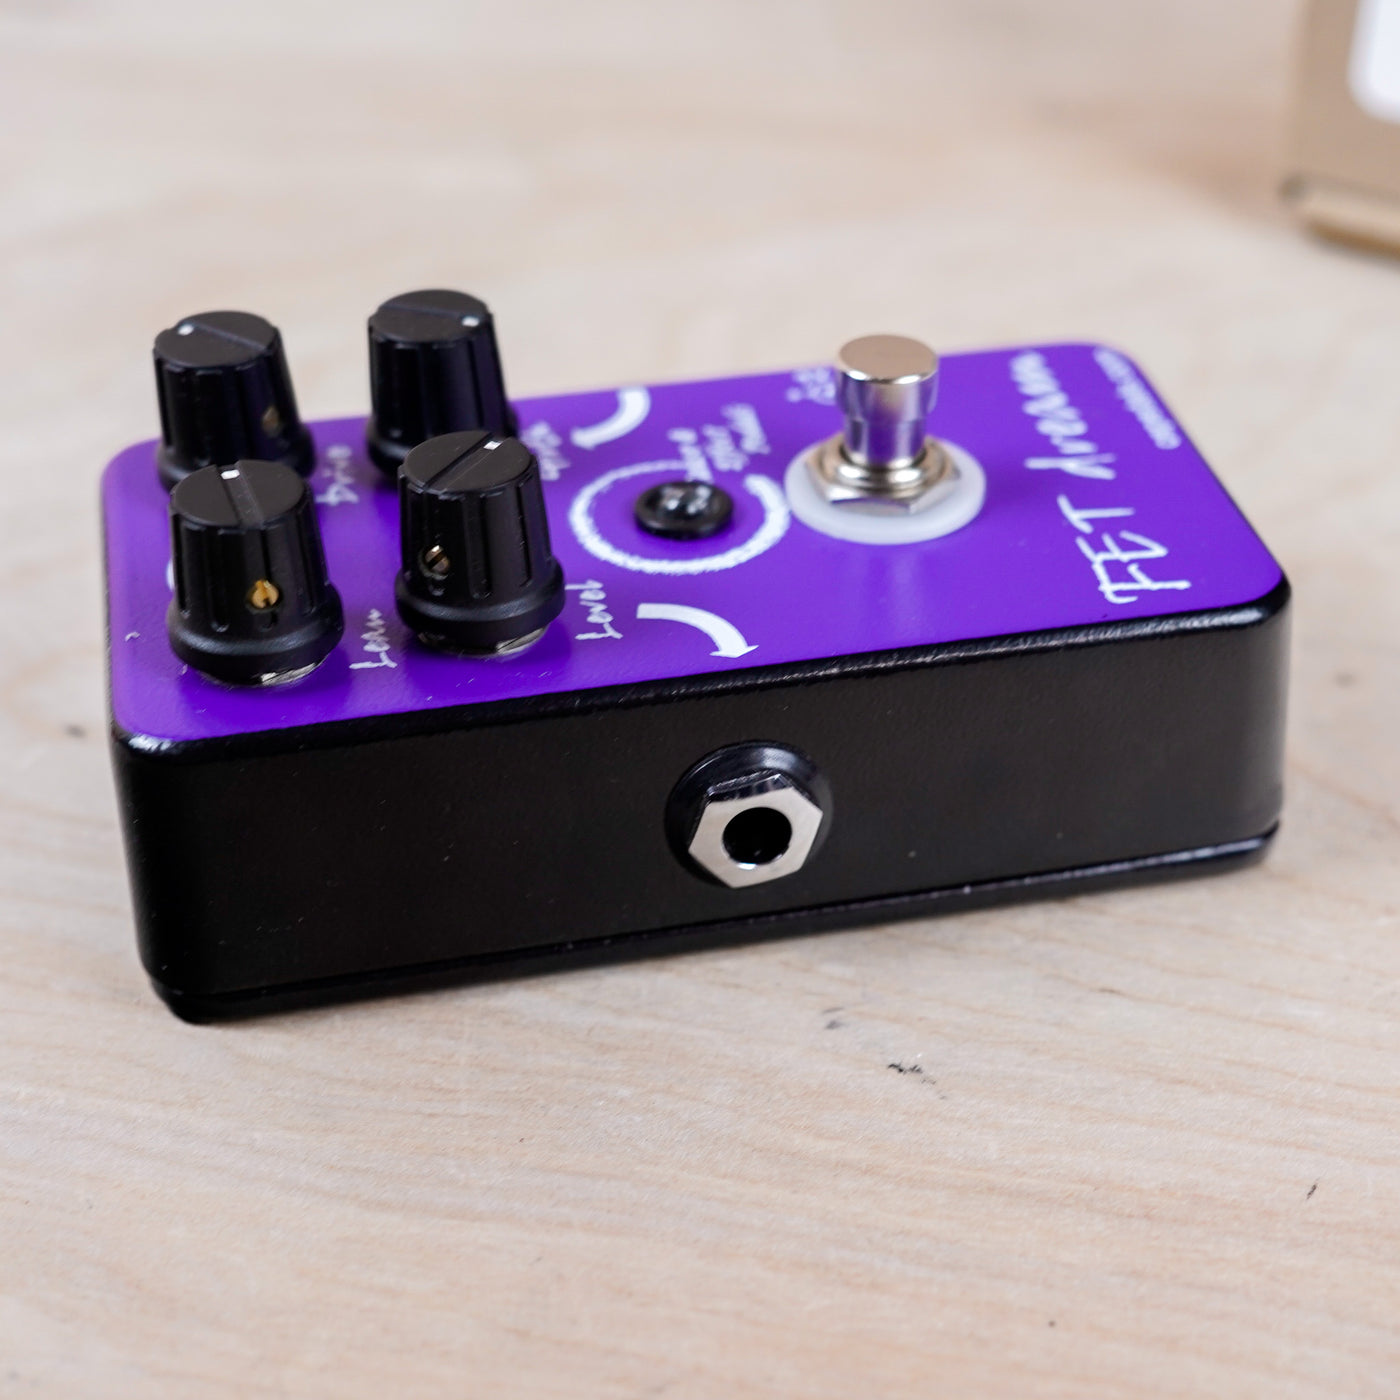 Cause and Effect Pedals FET Dream